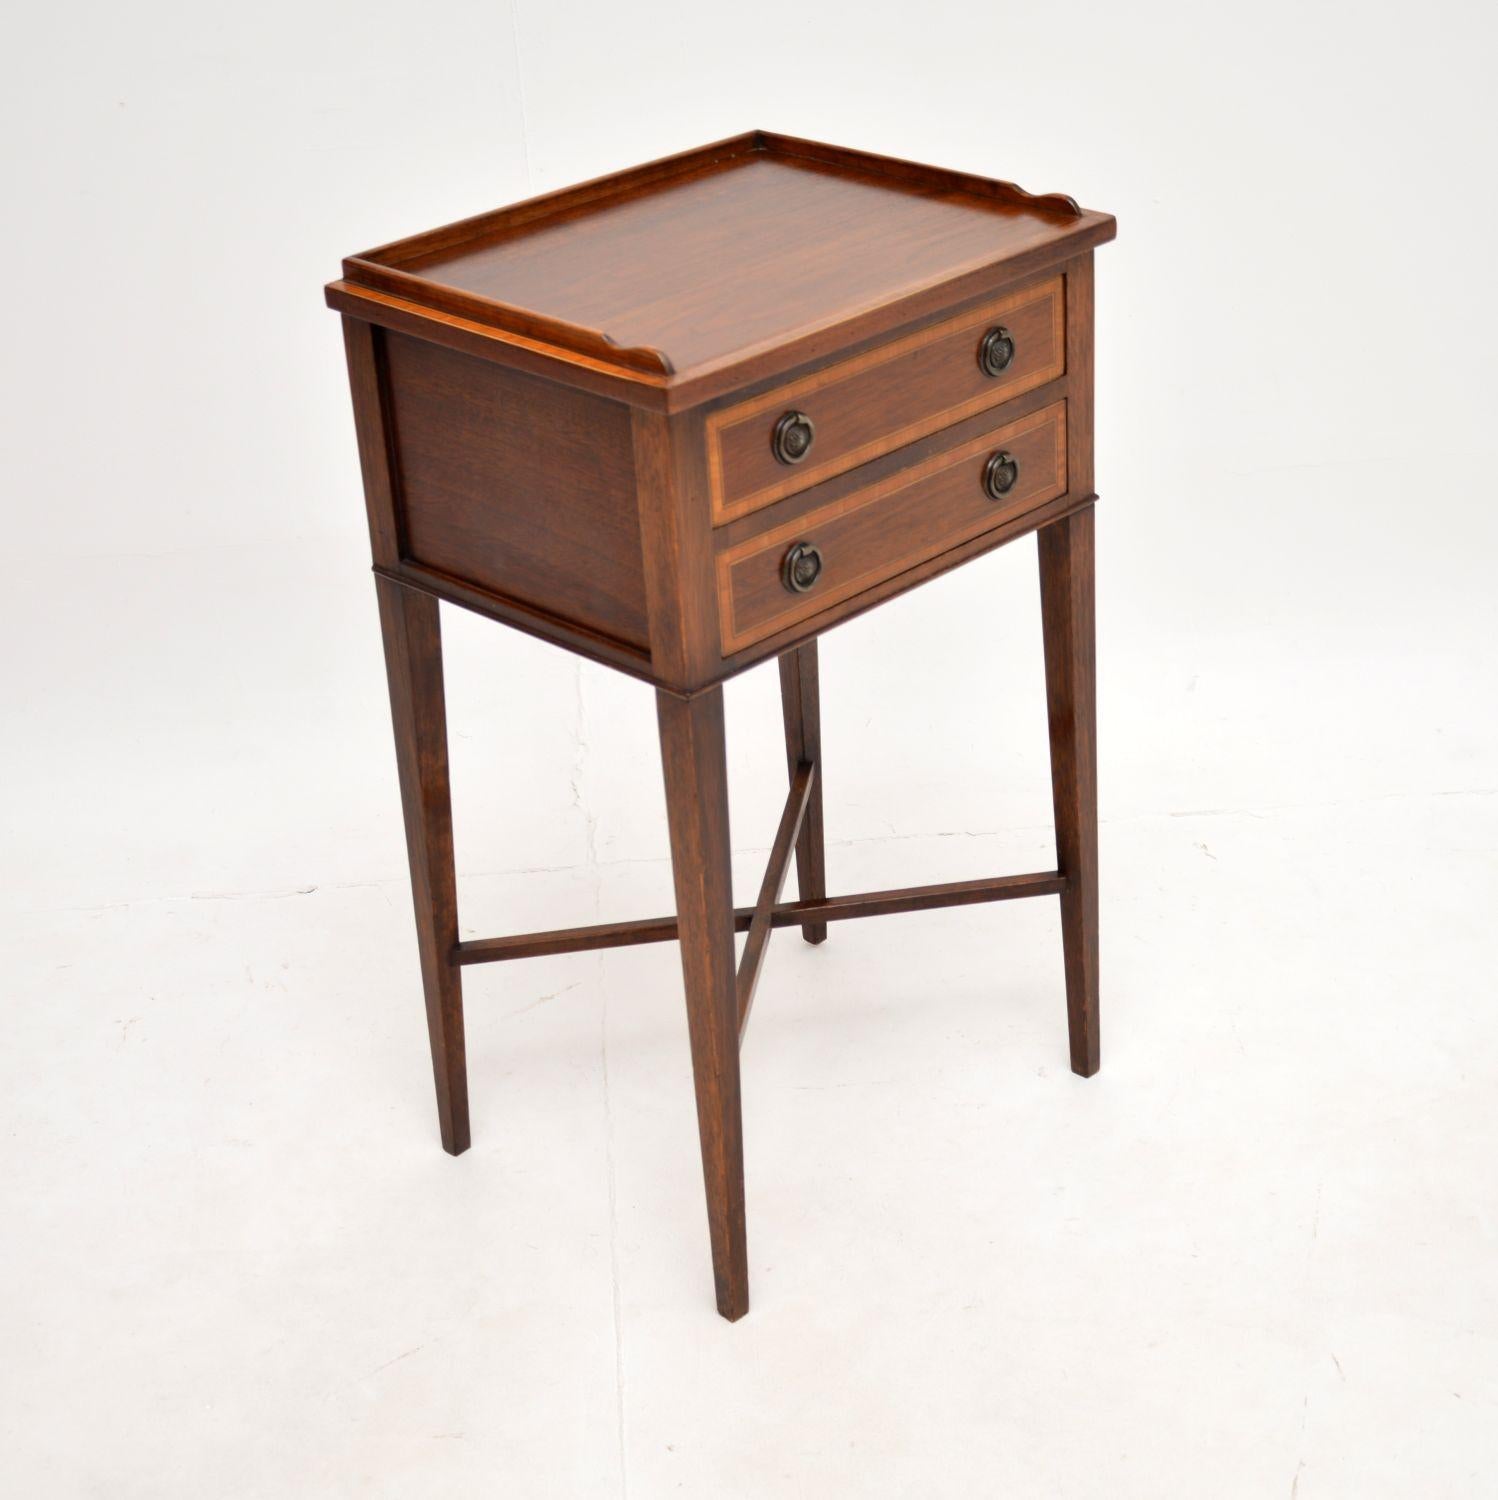 British Antique Edwardian Inlaid Side Table For Sale